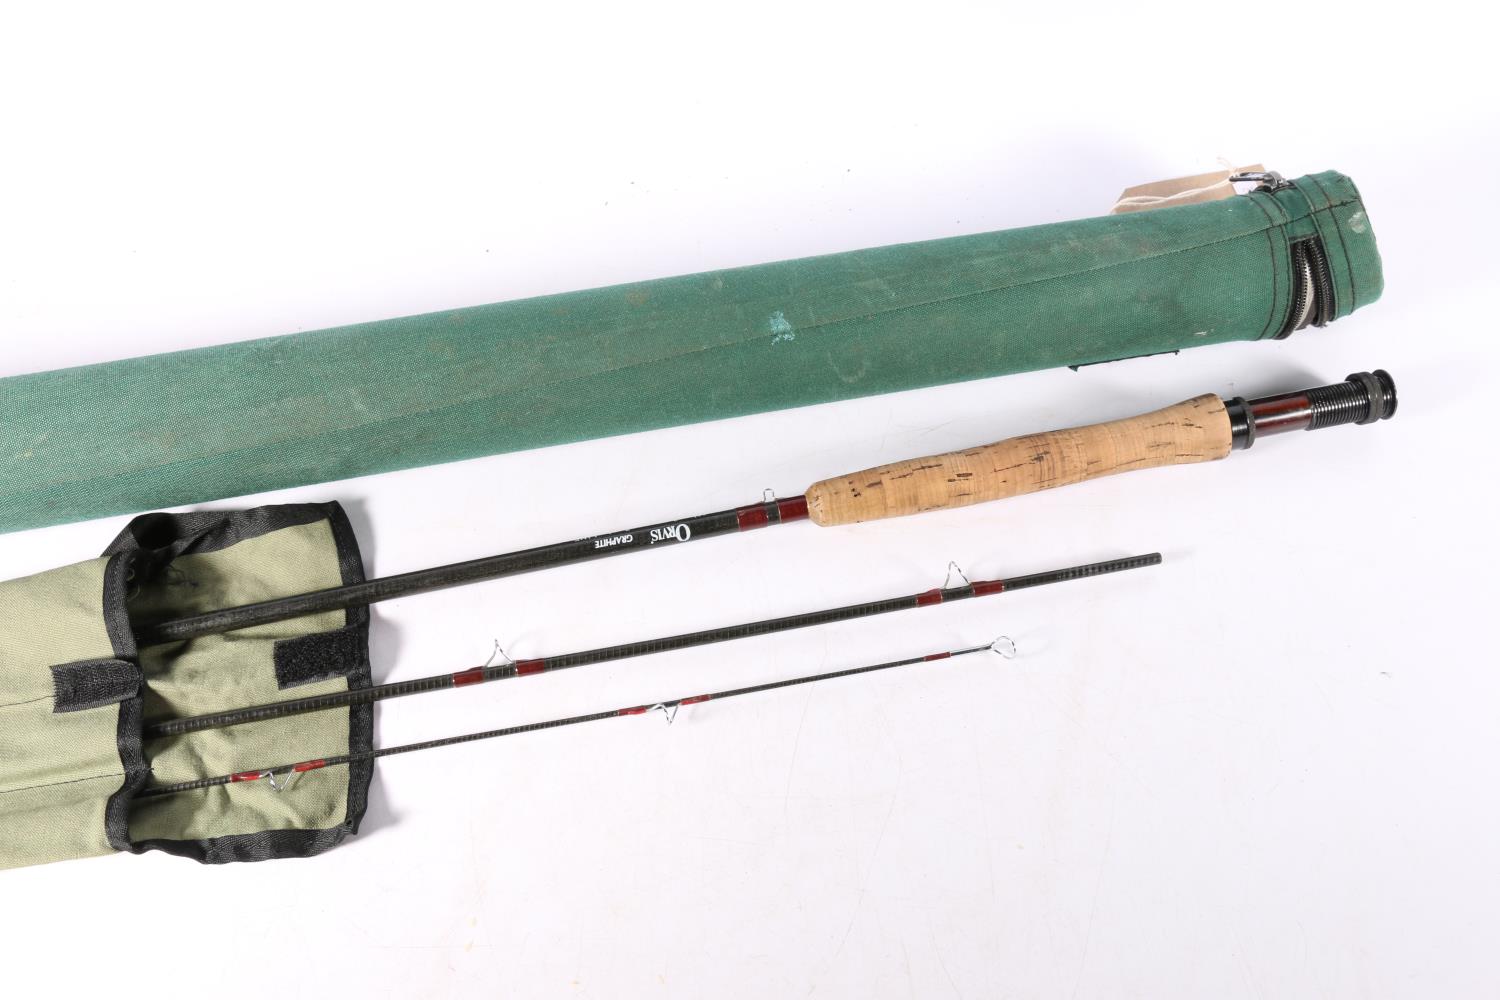 Orvis graphite 10' three piece fly fishing rod, possibly a Western, in cloth bag with outer hard